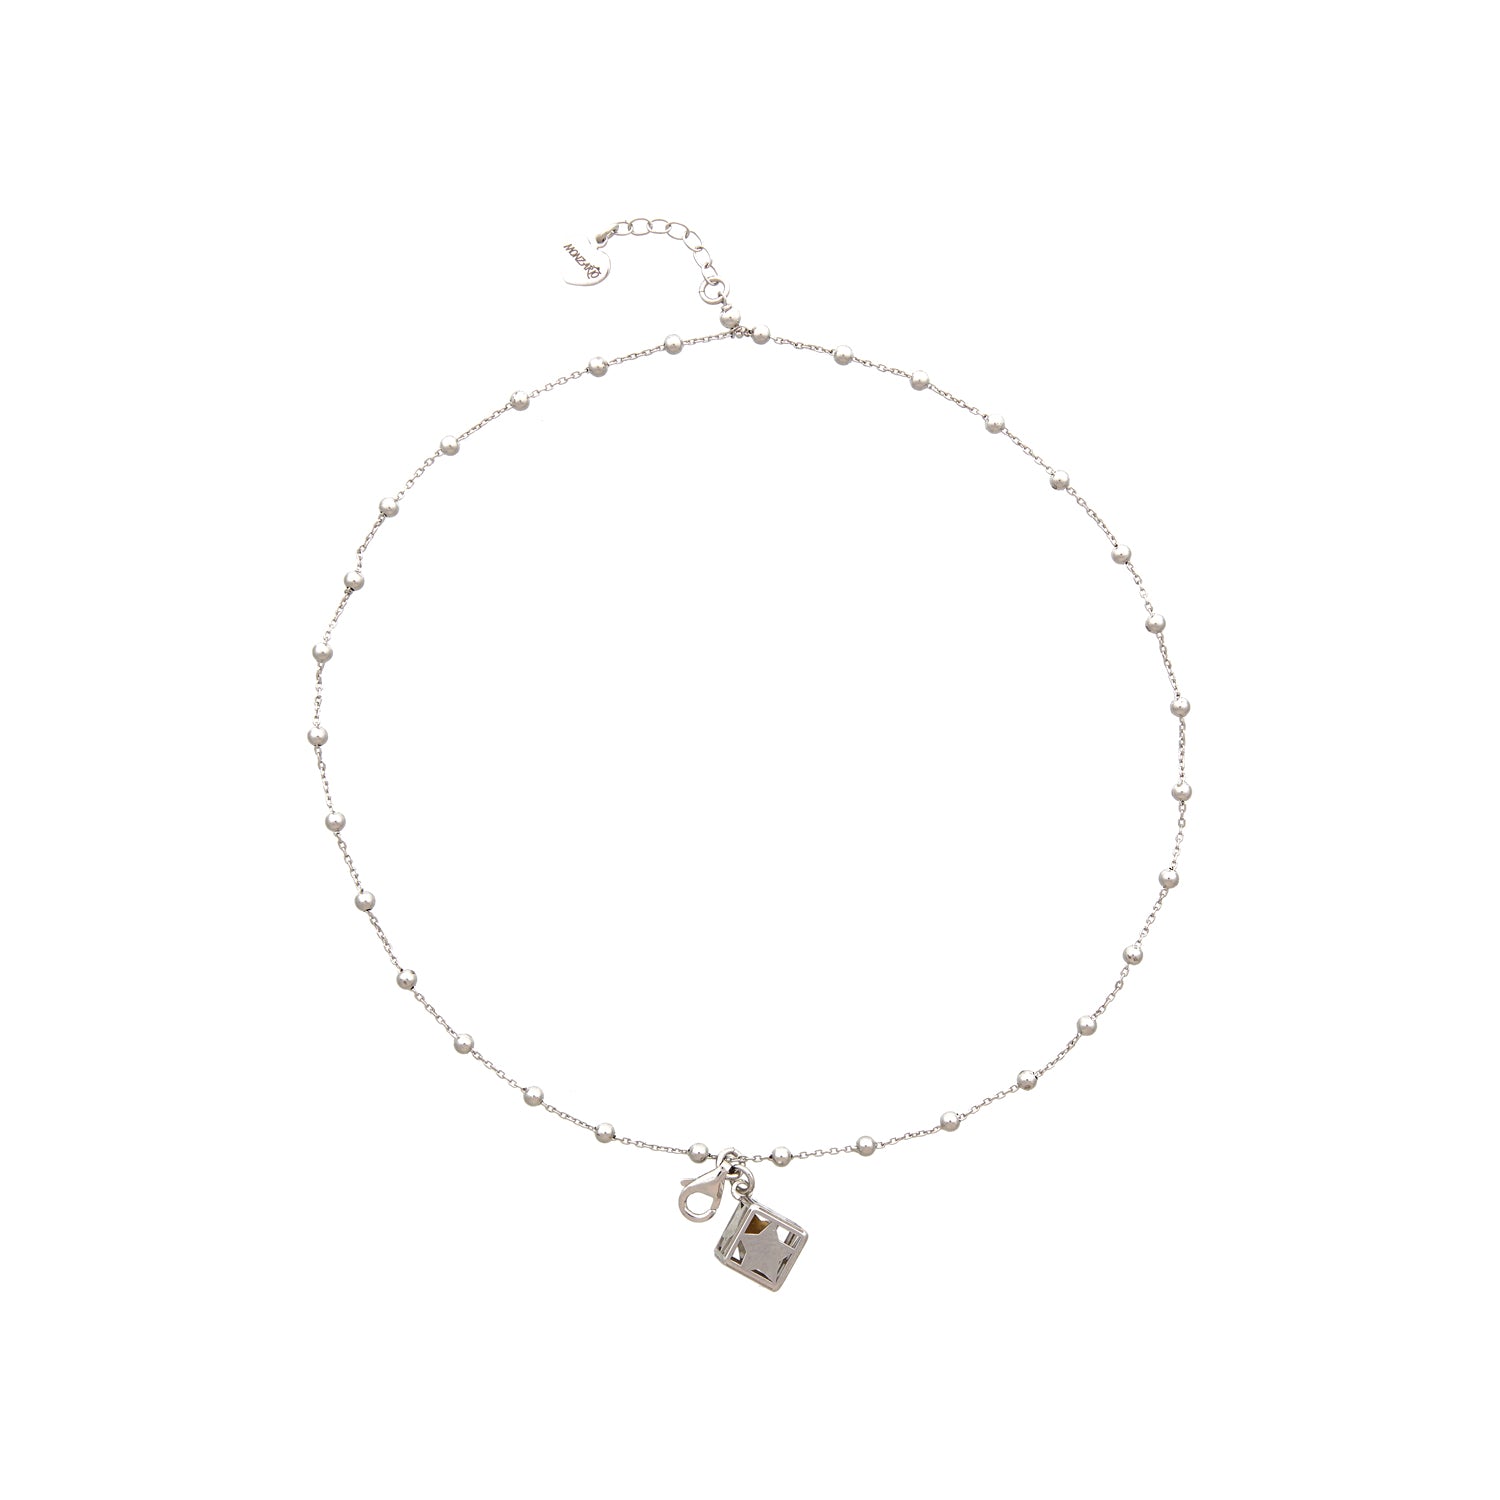 White gold bracelet with charm